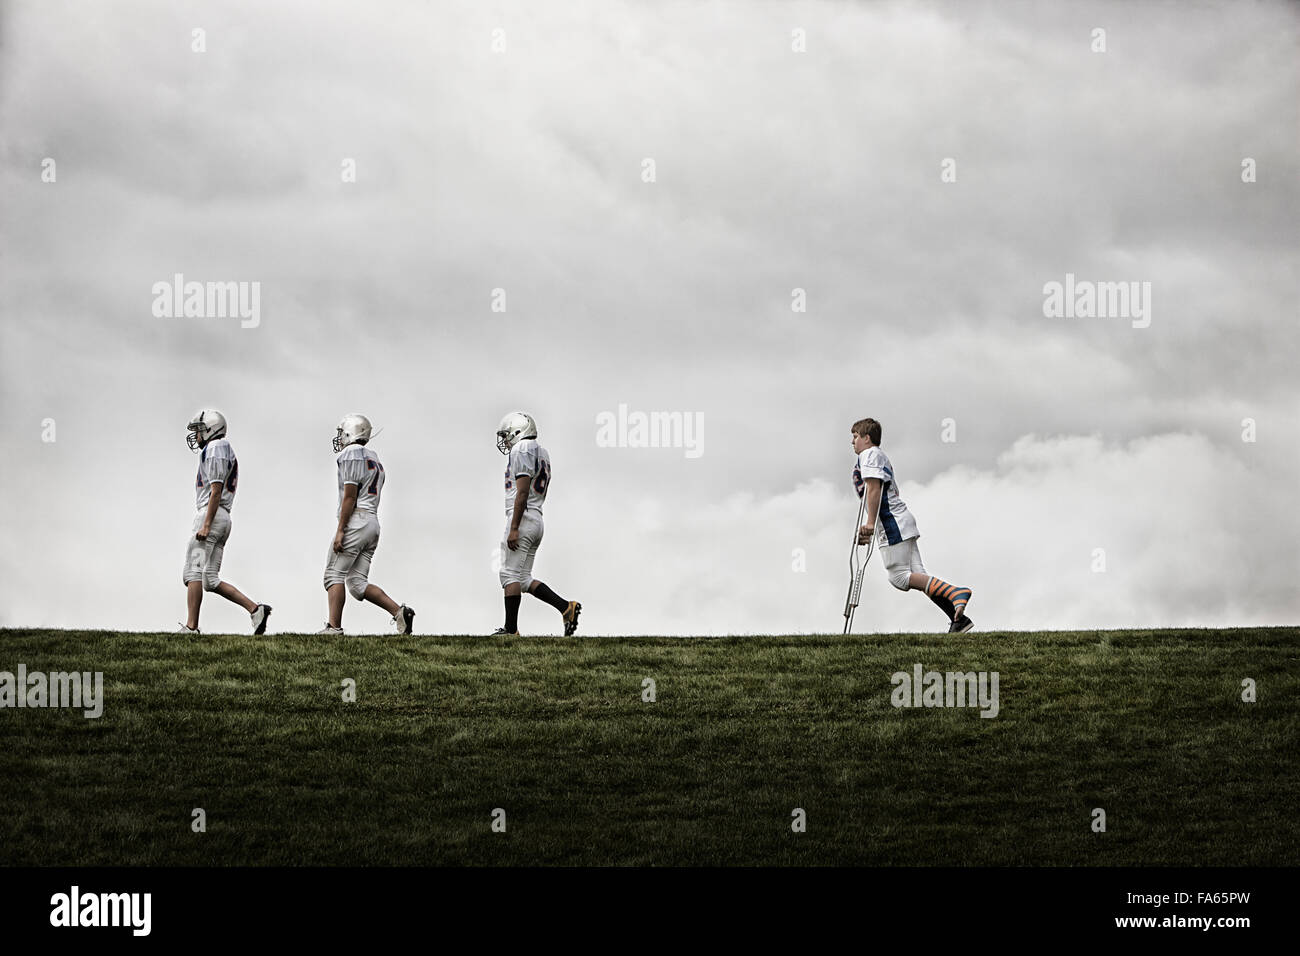 A group of football players, Three fit players walking in line, one using crutches following. Stock Photo